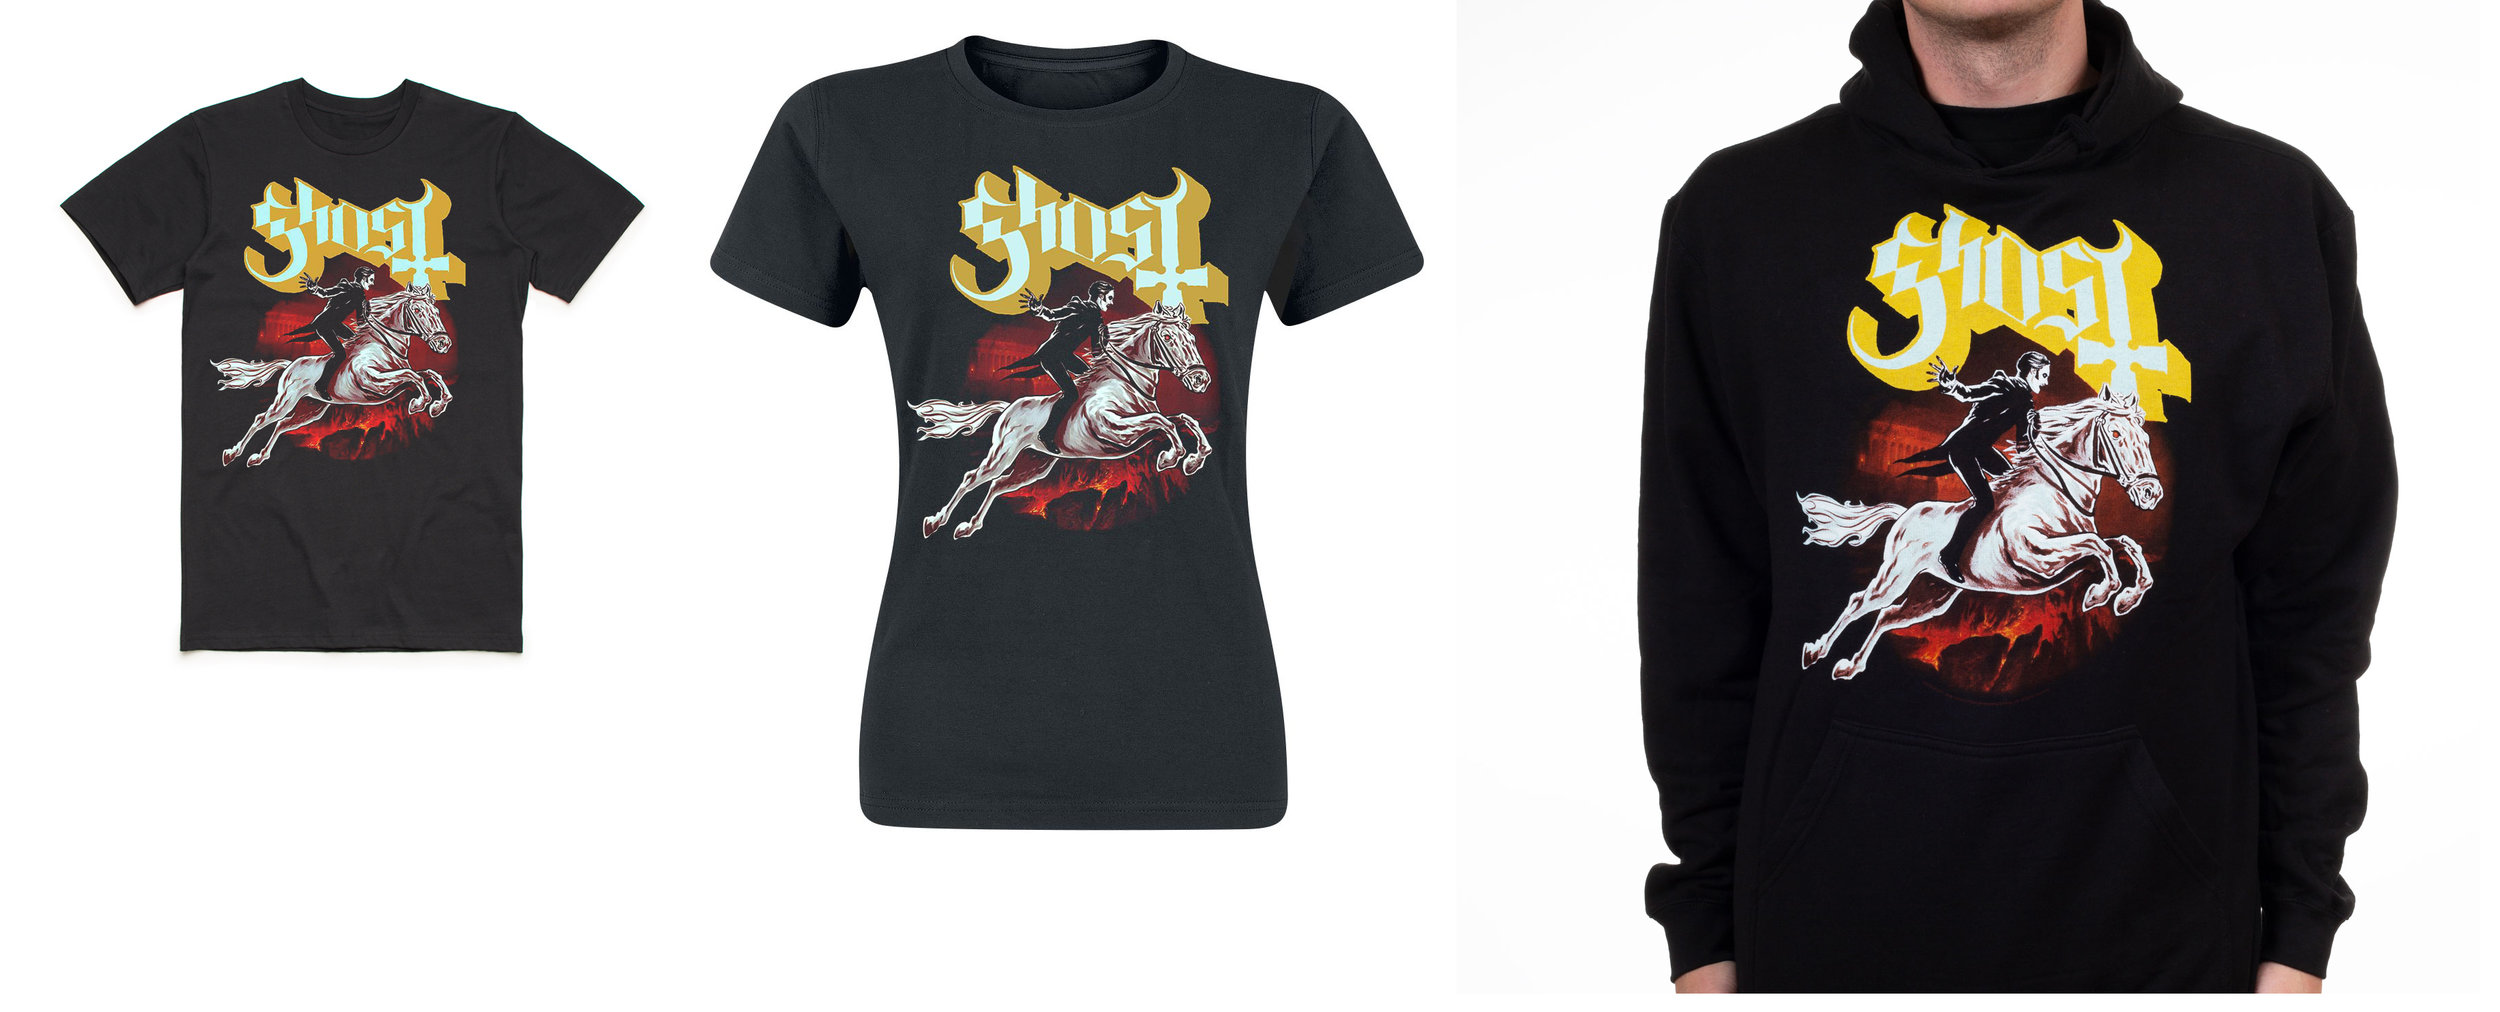   GHOST | official Pale Horse T-shirt and hoodie | 2018    